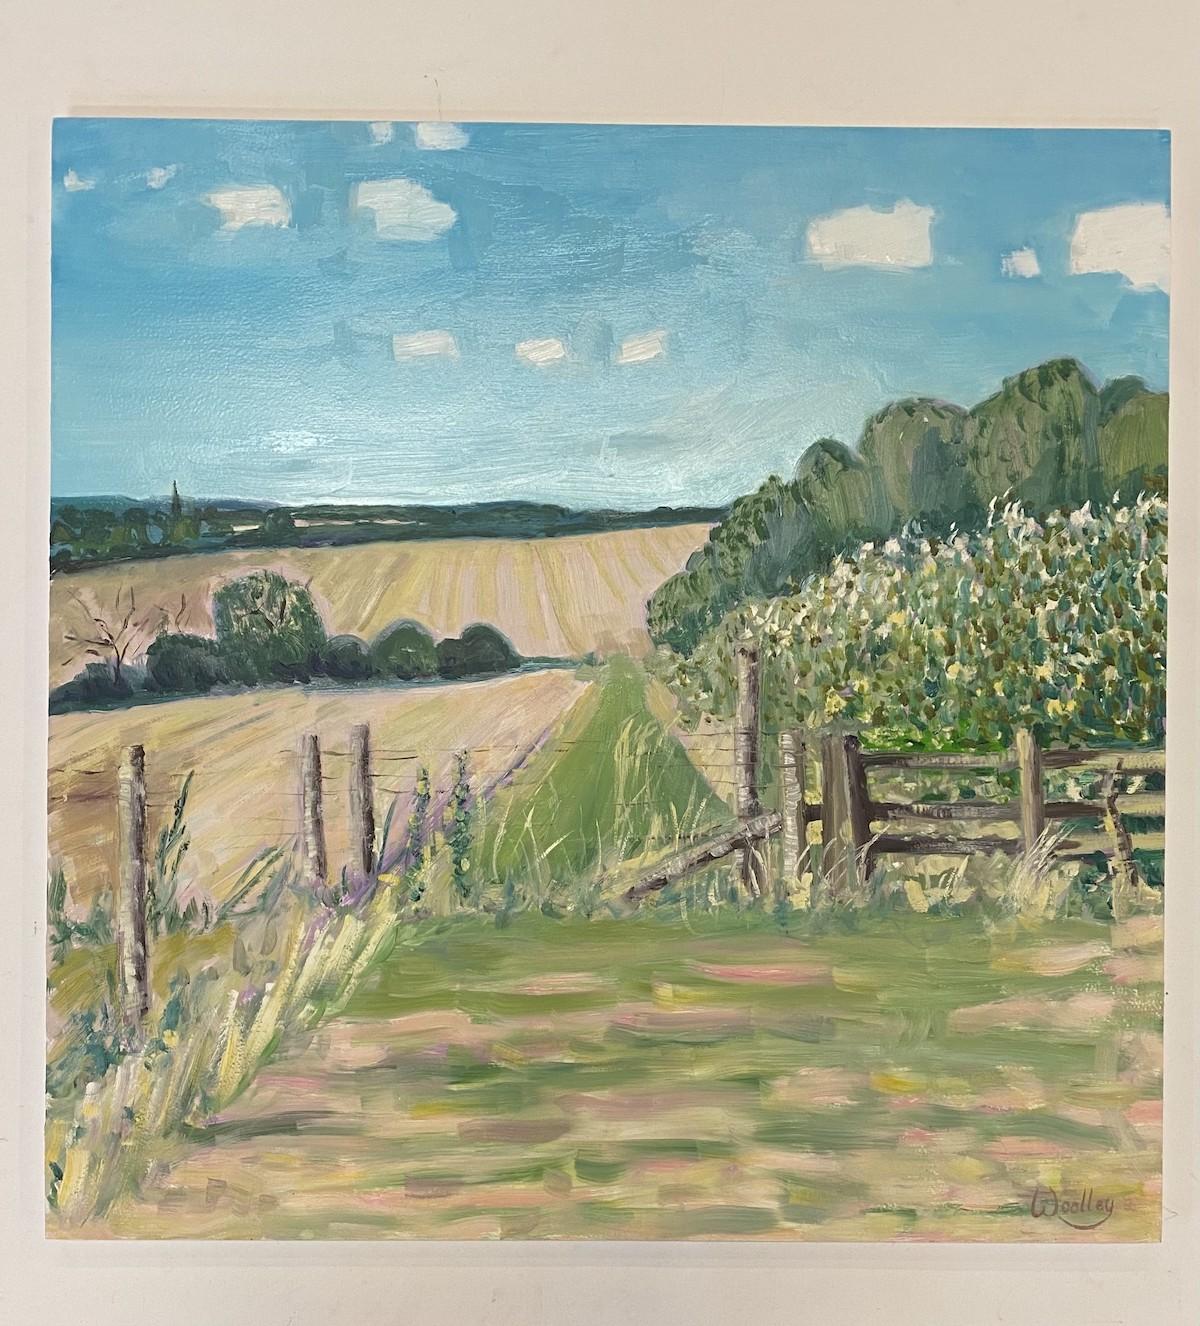 Walking out from Aynho by Eleanor Woolley 
Original and hand signed by the artist 
Gesso on Board
Image Size: H61cm x W:61cm
Complete size of unframed work: H:61cm x W:61cm x D:1cm
Sold unframed 
Please note that insitu images are purely an